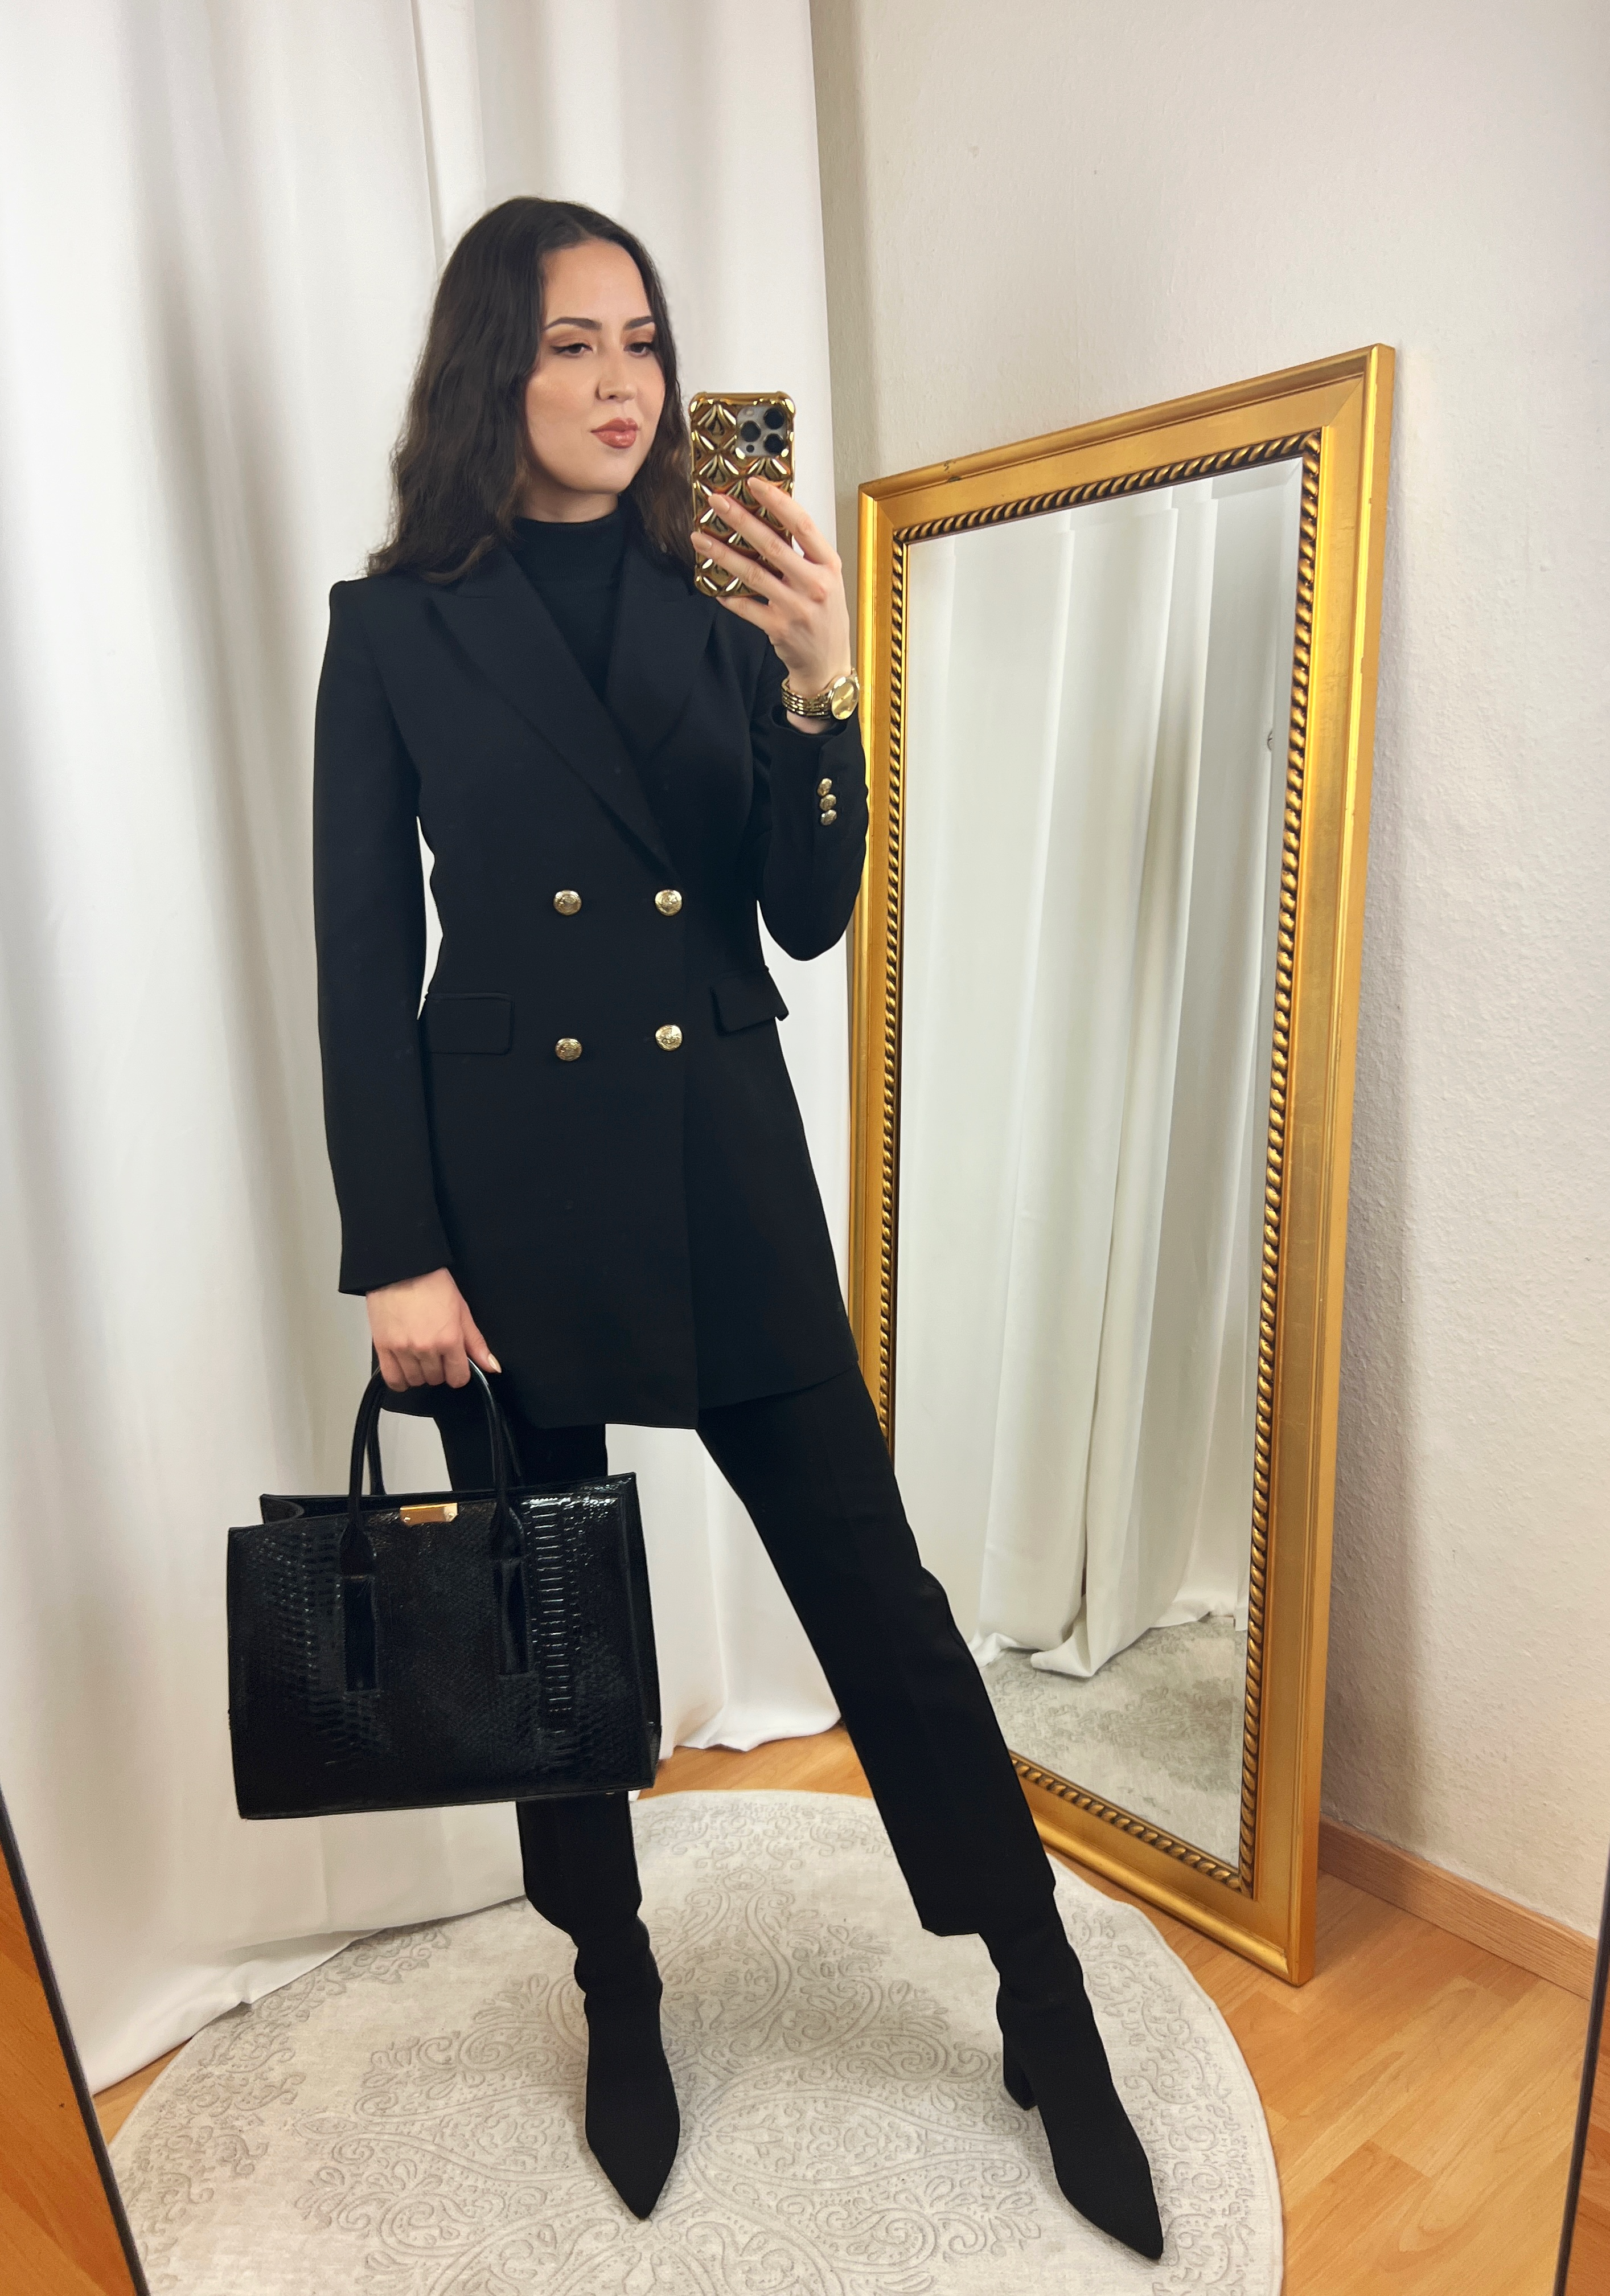 Long Black Blazer and Black Dress Pants Outfit for the Winter